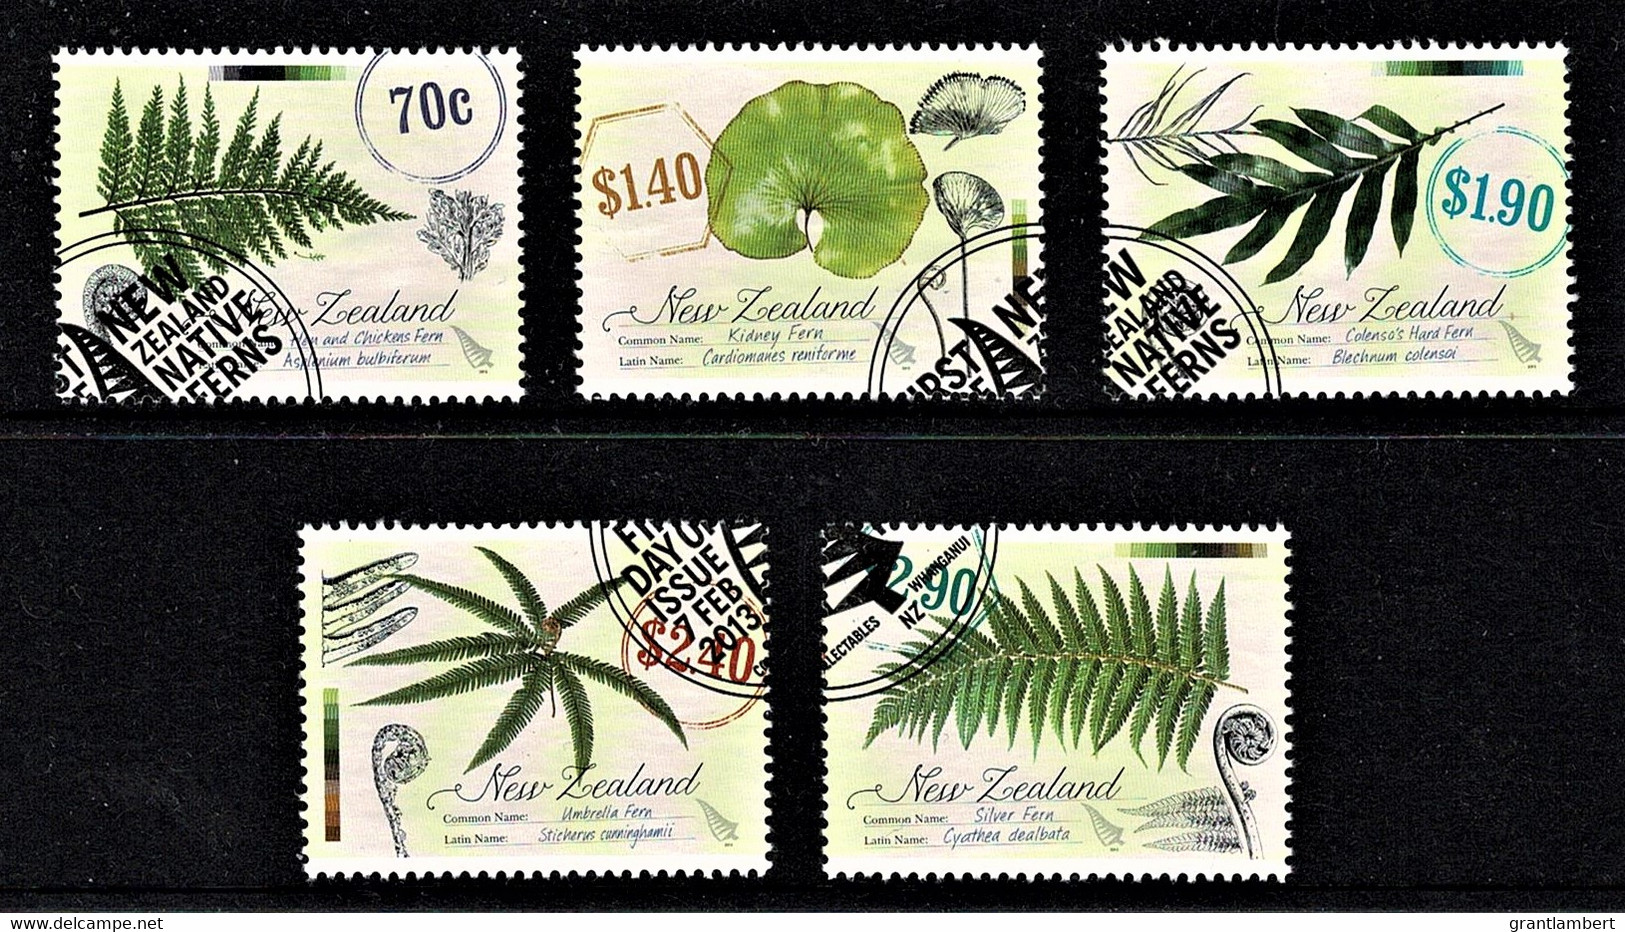 New Zealand 2013 Native Ferns Set Of 5 Used - Used Stamps